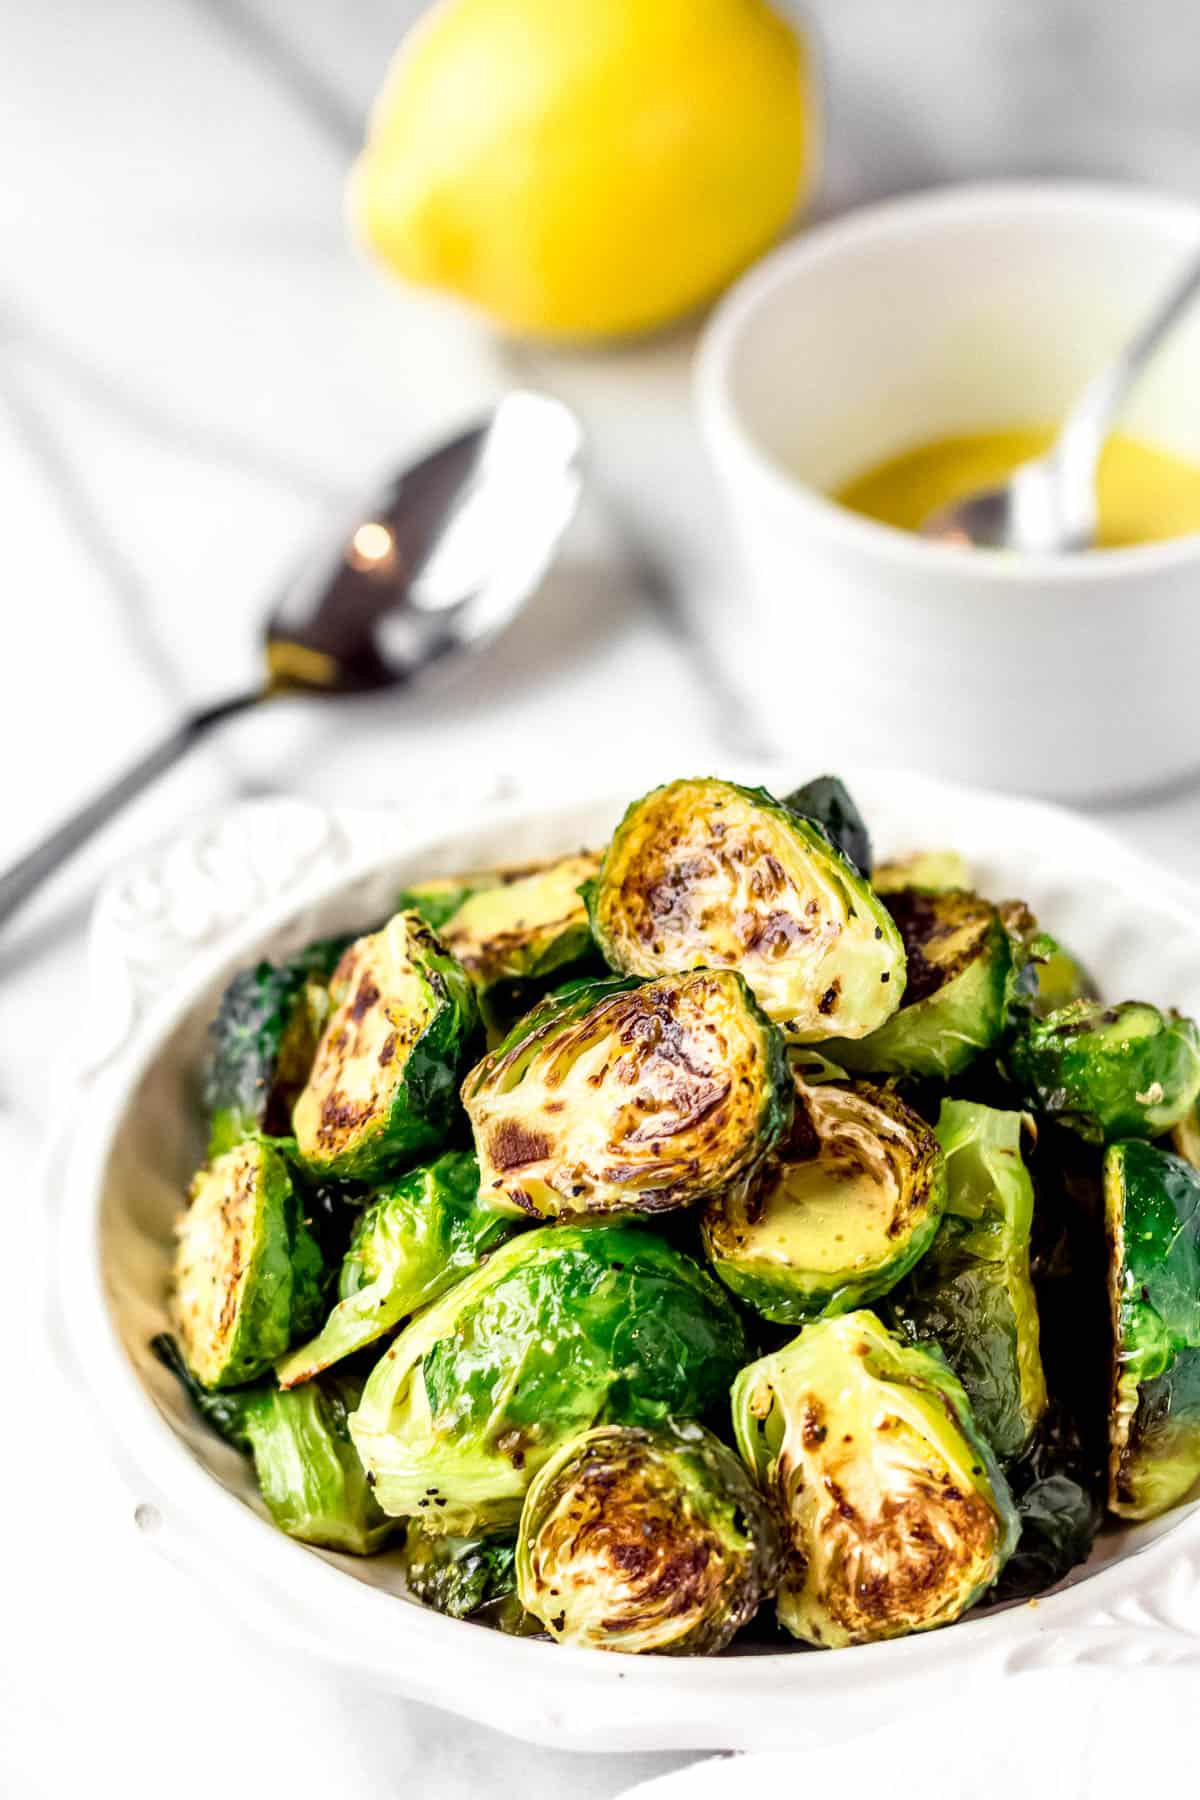 Roasted brussels sprouts in a white bowl with a lemon, spoon and small bowl of dressing in the background